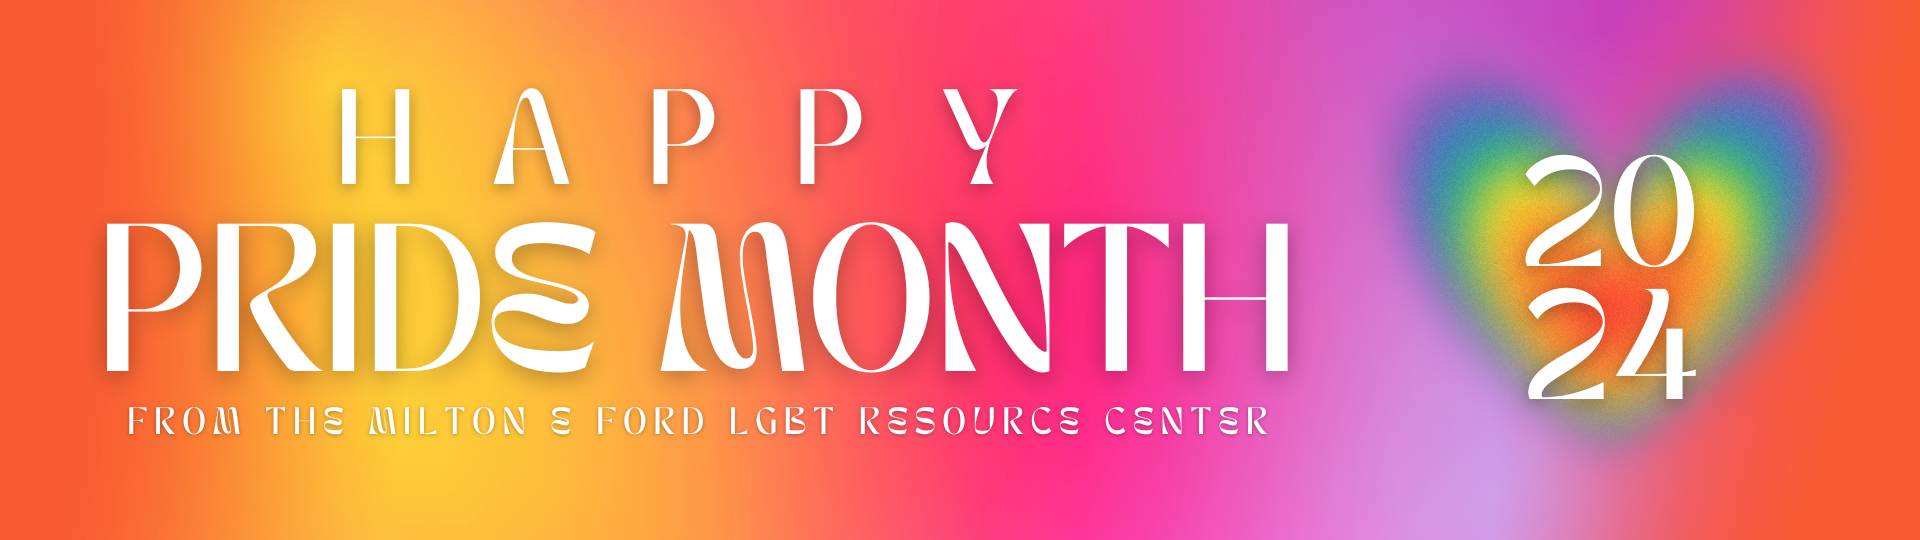 Happy Pride 2024 from the Milton E. Ford LGBT Resource Center!